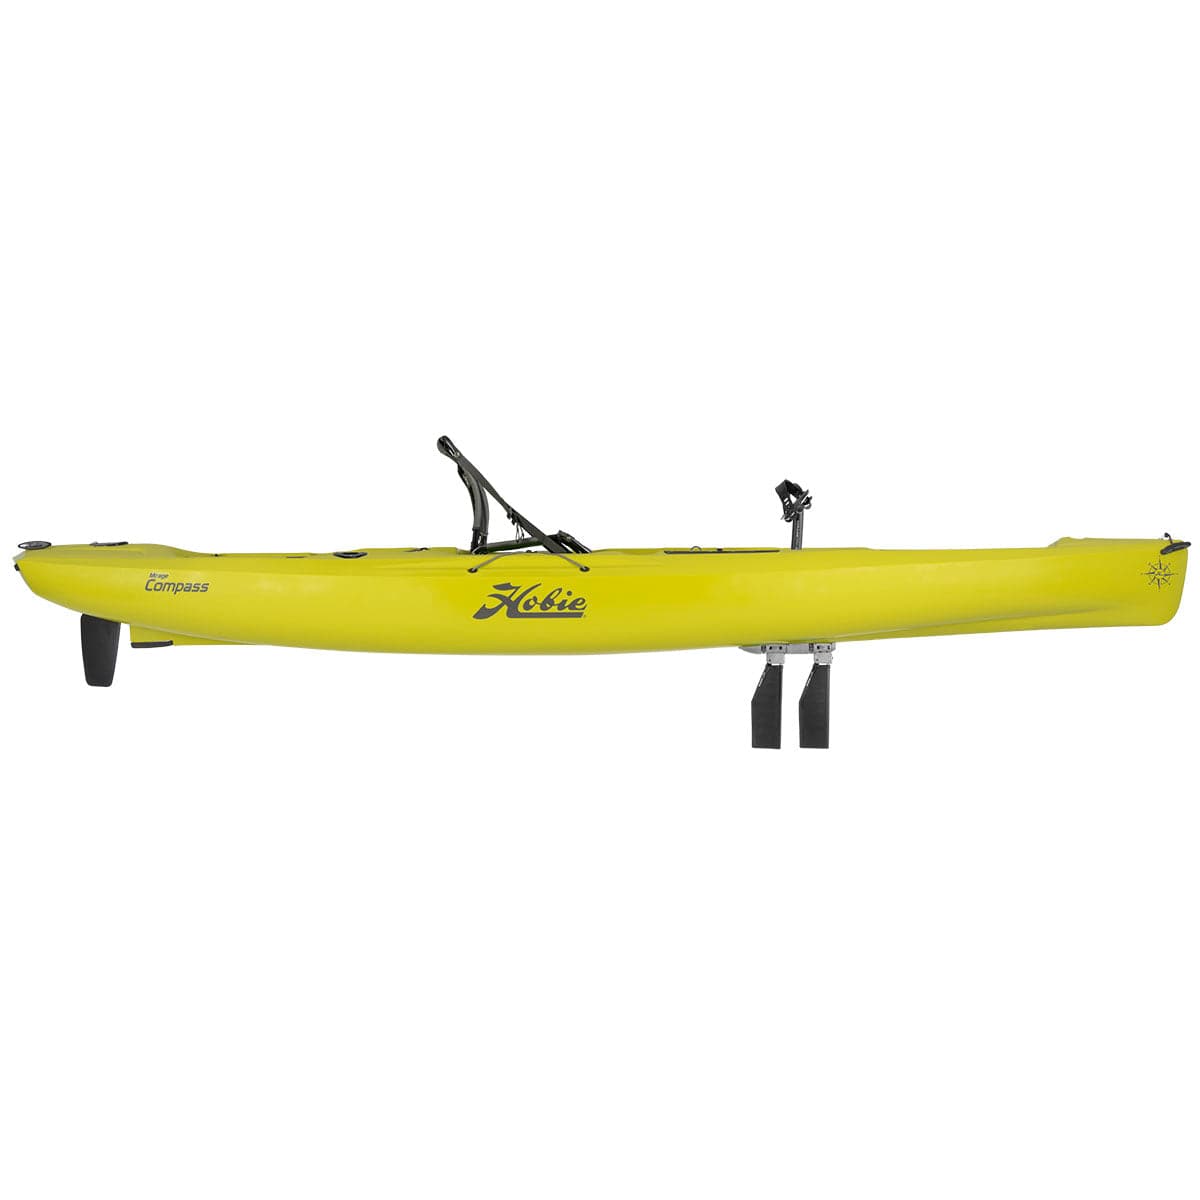 Featuring the Mirage Compass 12 fishing kayak, pedal drive kayak manufactured by Hobie shown here from a fourth angle.